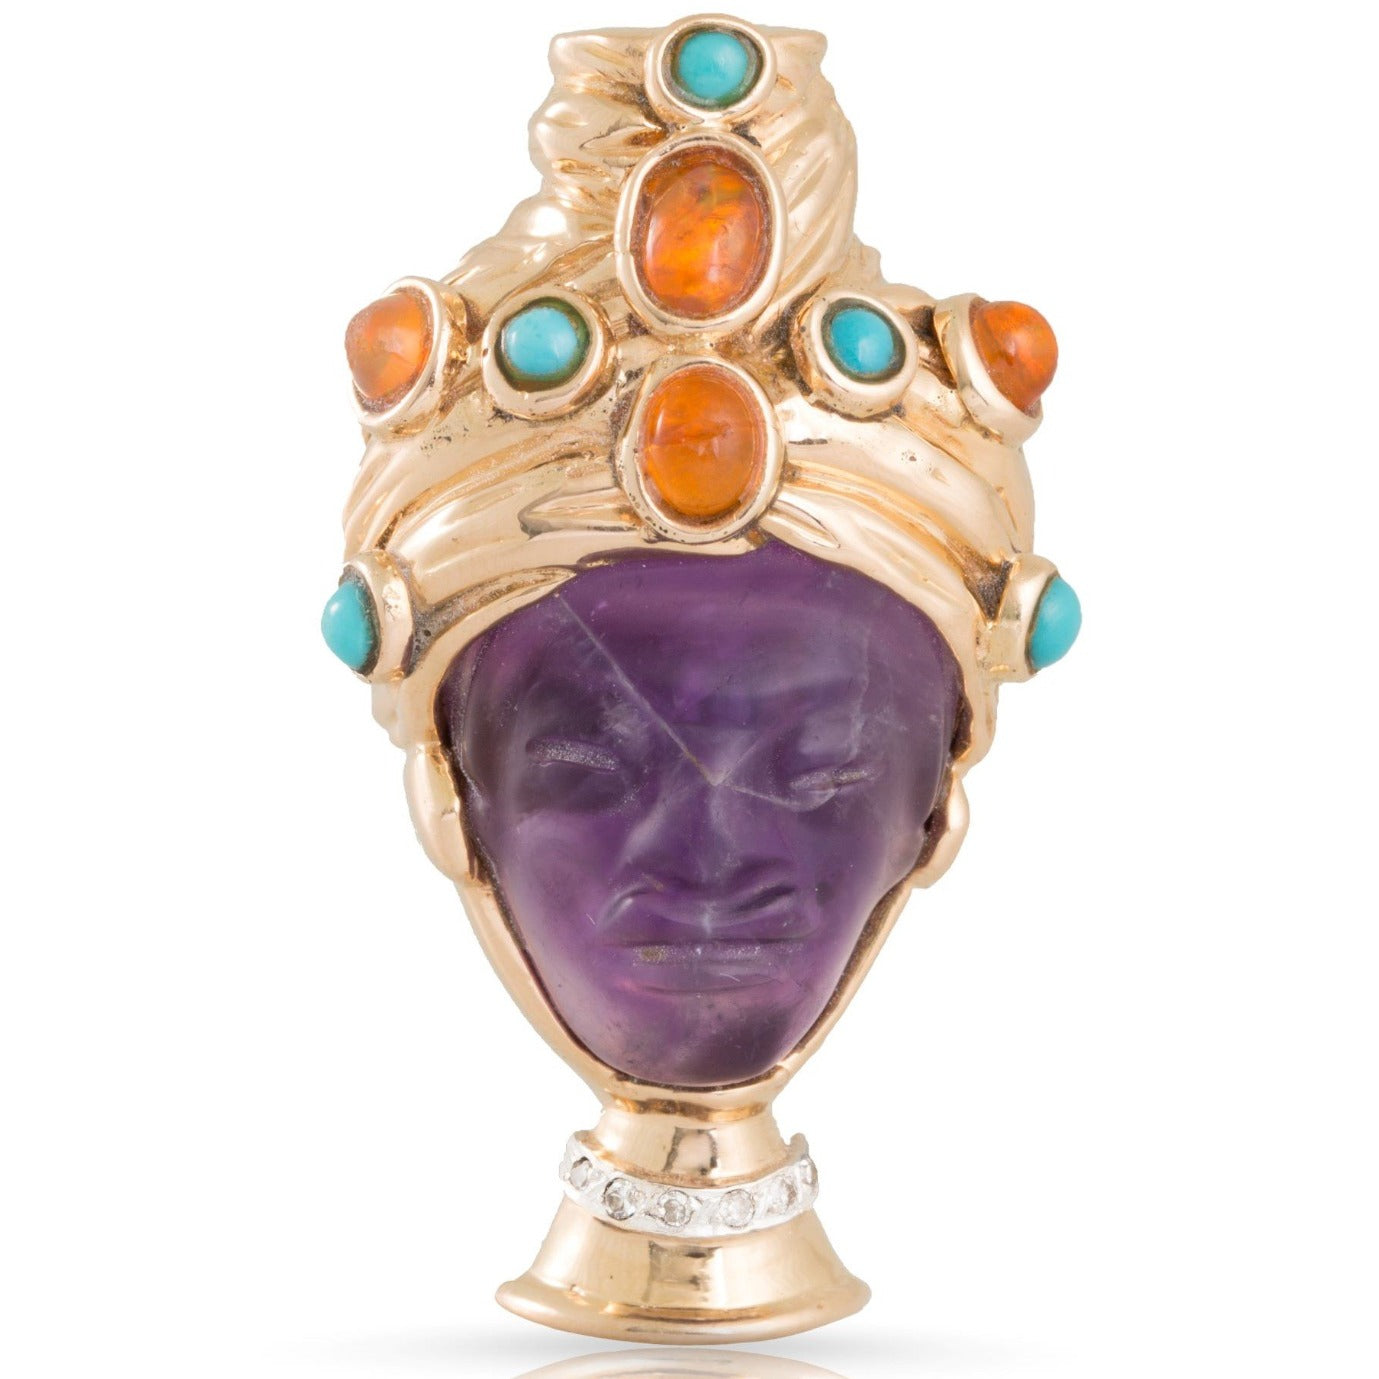  Gemstone ring with amethyst-carved blackamoor face, opal, turquoise, and diamonds. 